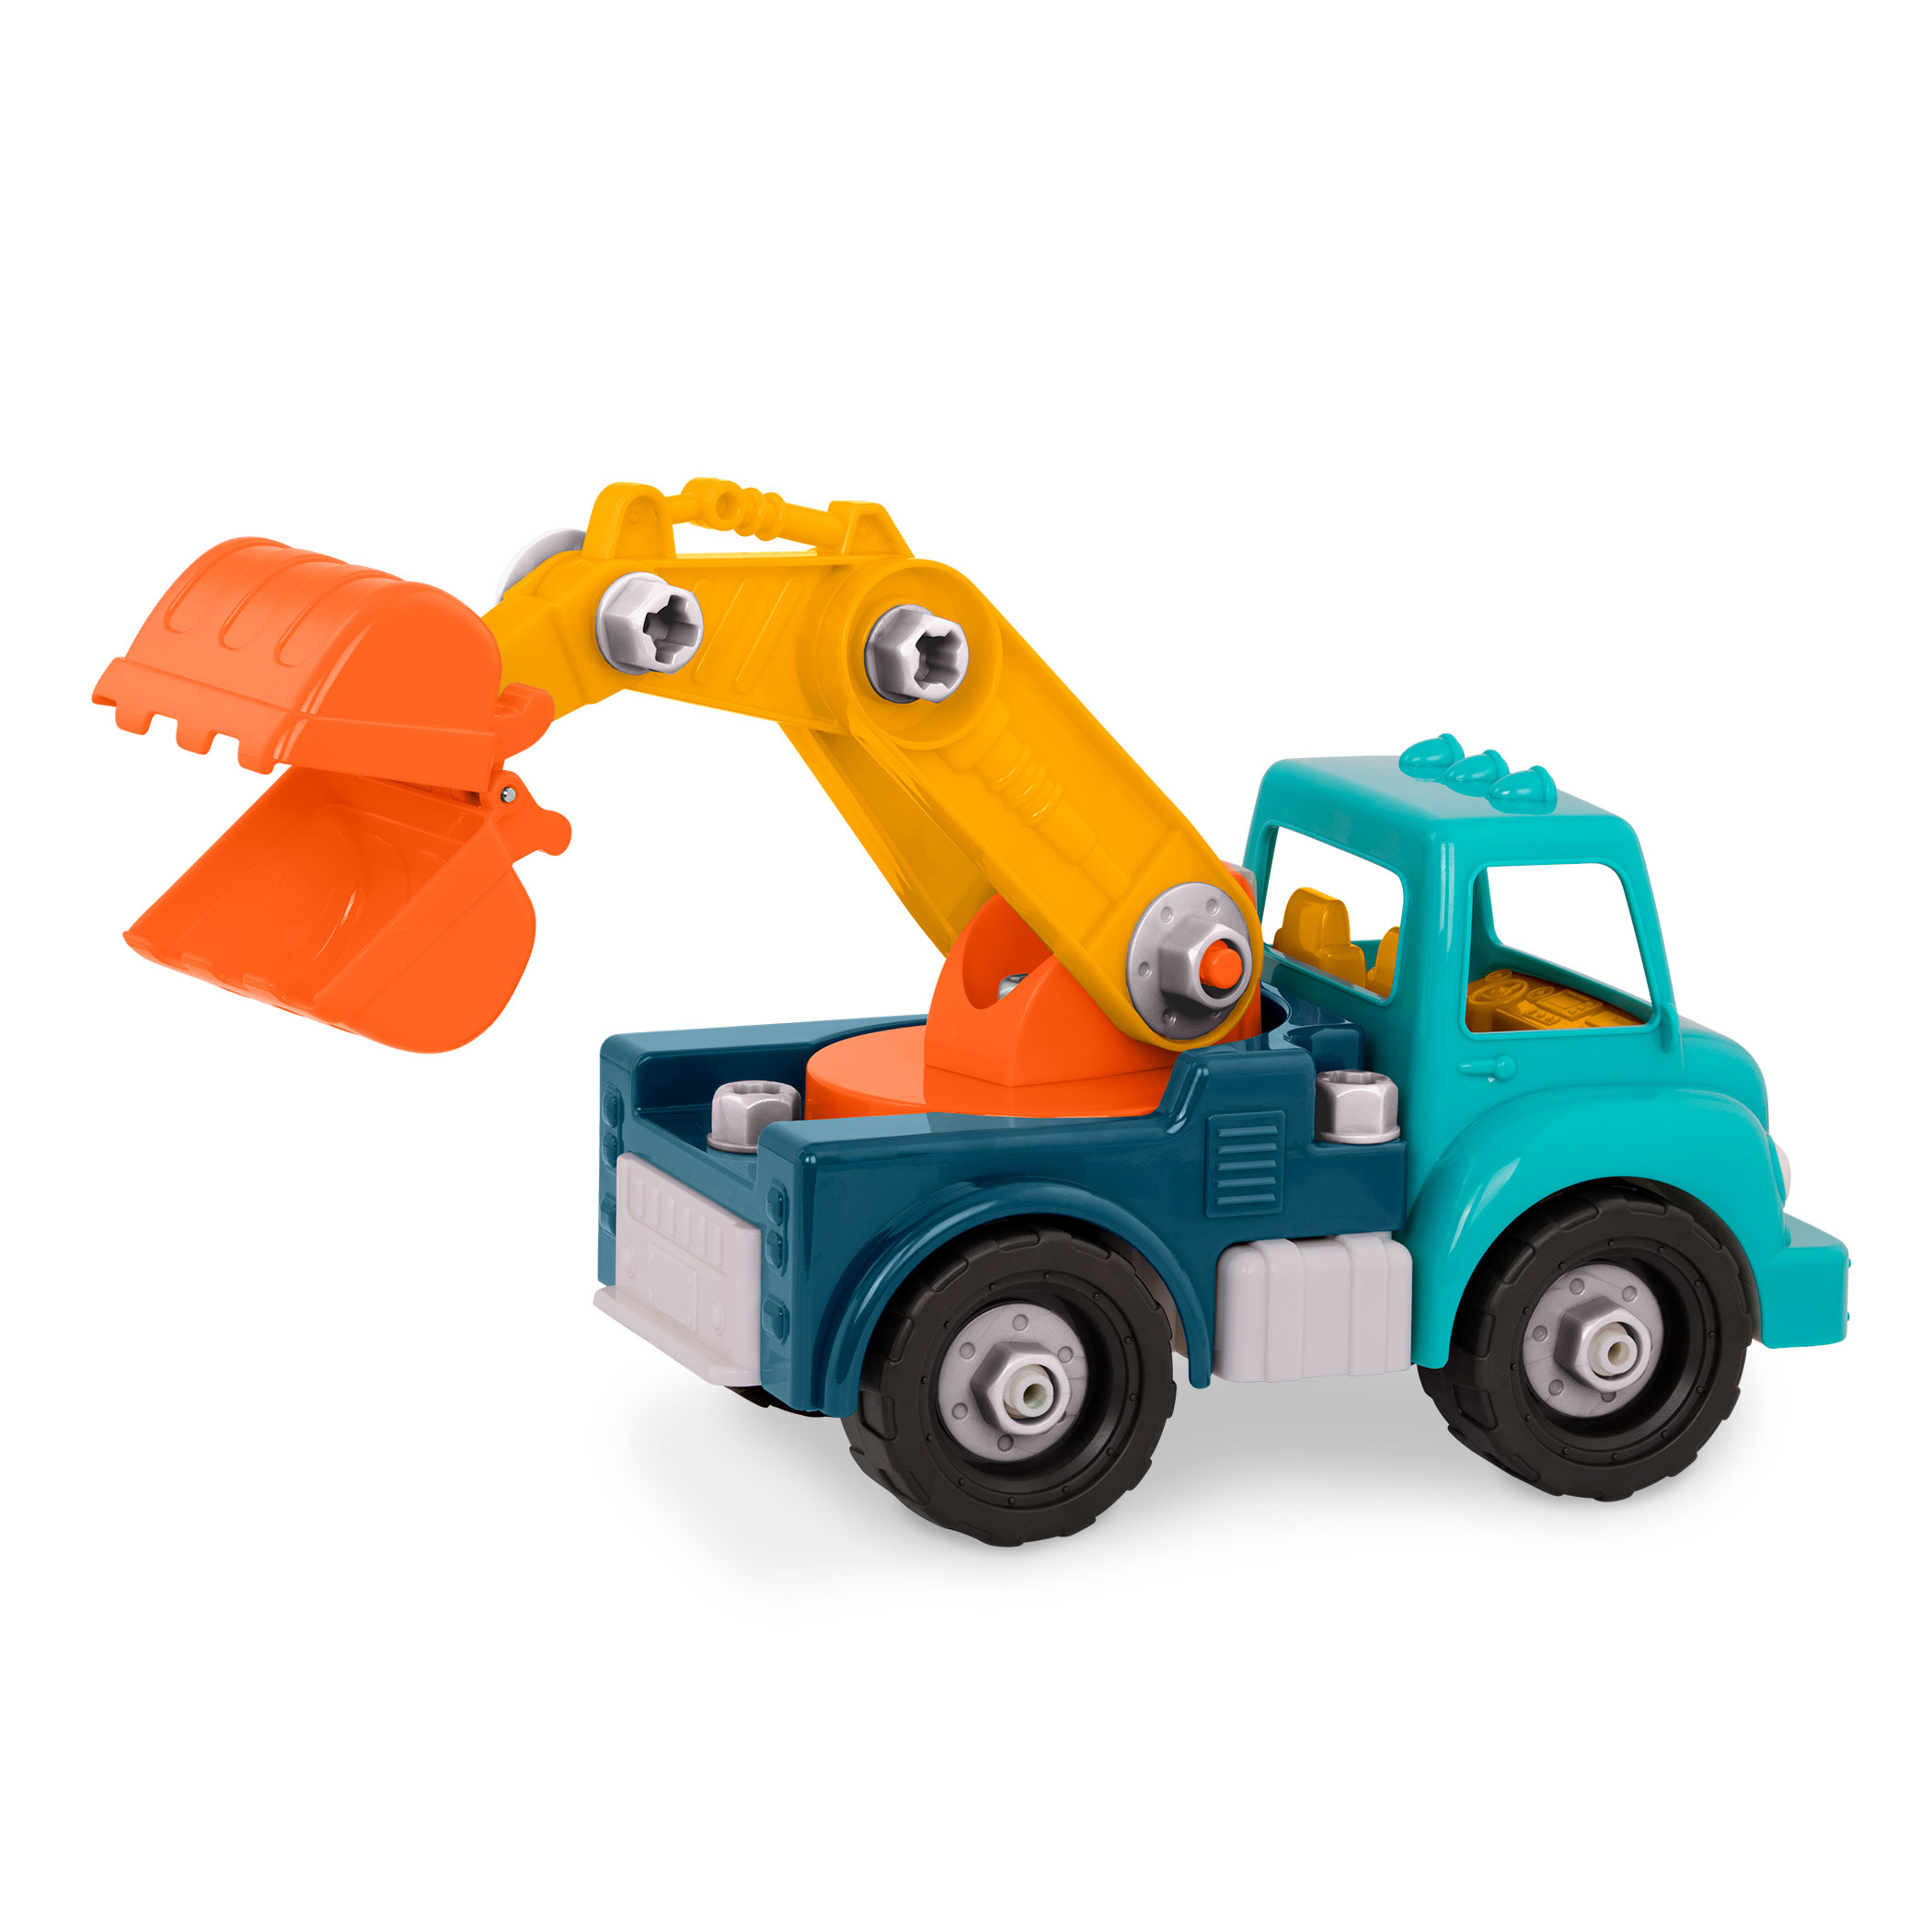 Take-Apart Crane, Construction Toys for Toddlers